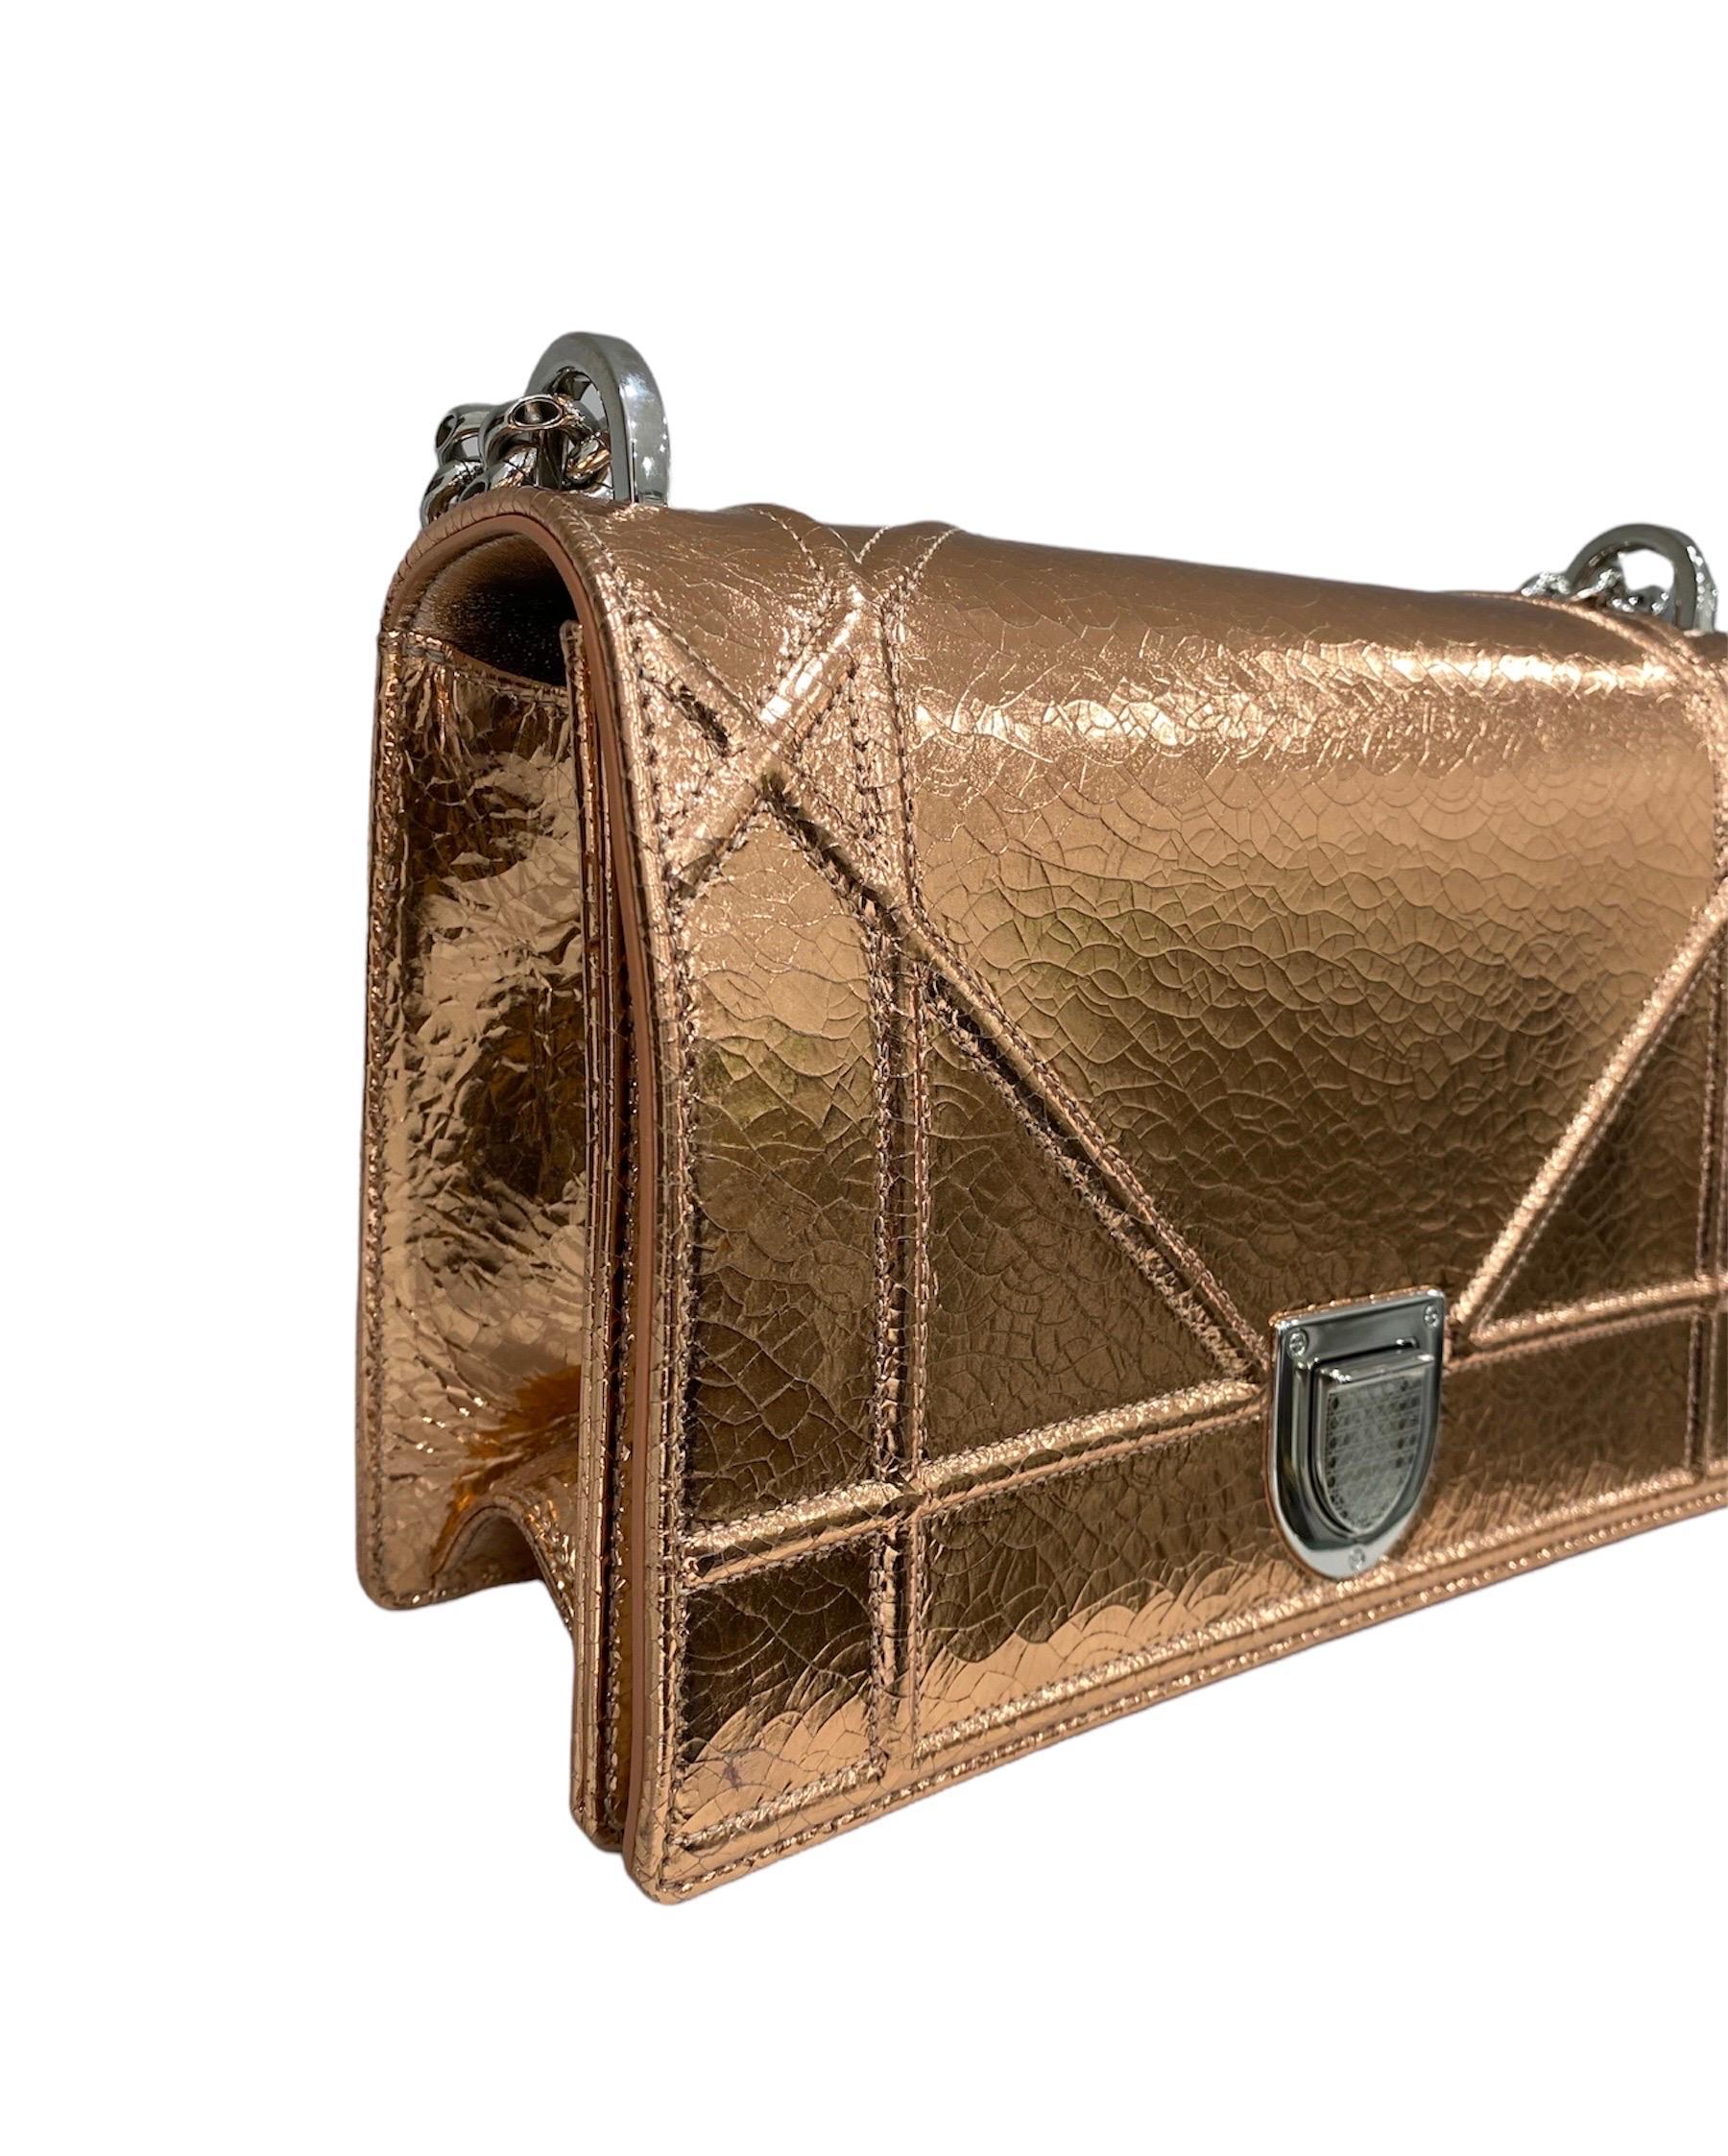 Dior Diorama model shoulder bag in copper-colored shiny leather with silver hardware.

It has a front flap with interlocking closure. The interiors are lined with a black fabric and is equipped with internal pockets including one with zip closure,